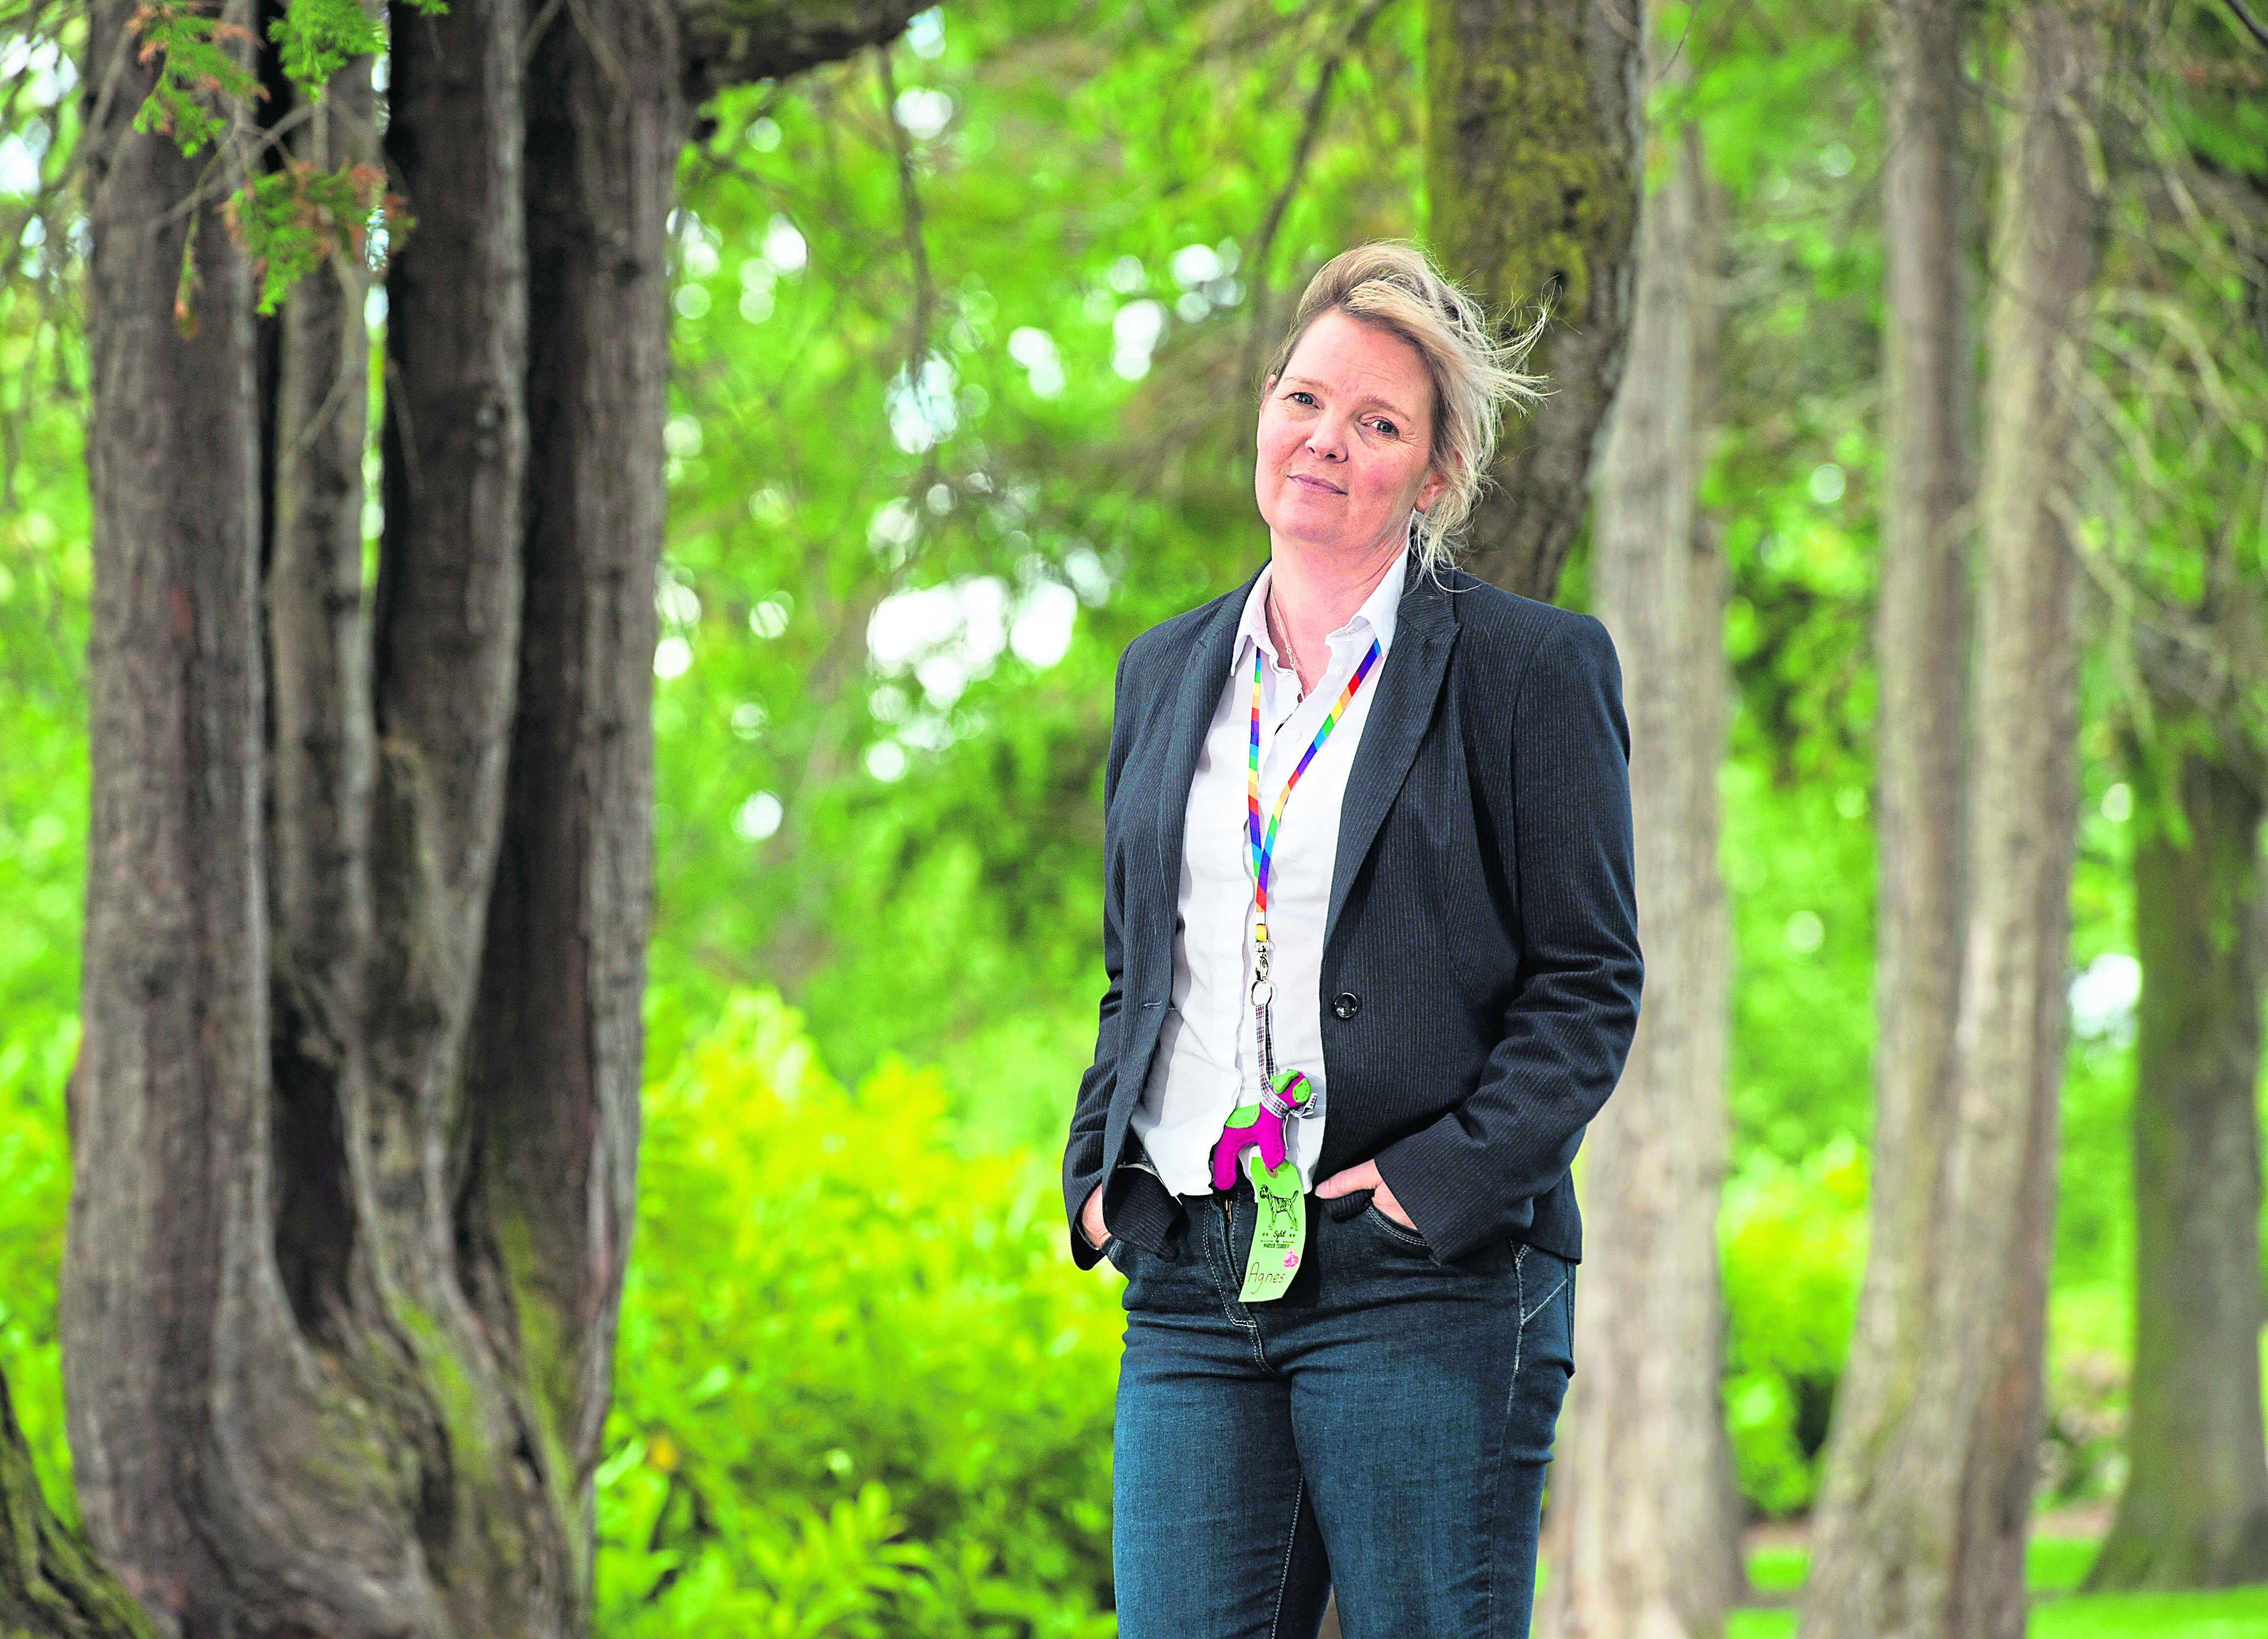 Huntington's Disease campaigner and Moray councillor Louise Laing opens up family's shock at discovering deadly gene is in her family as she aims to travel to groups across north of Scotland to raise awareness of condition. Louise is pictured at Cooper park, Elgin, Moray.

Picture by Jason Hedges